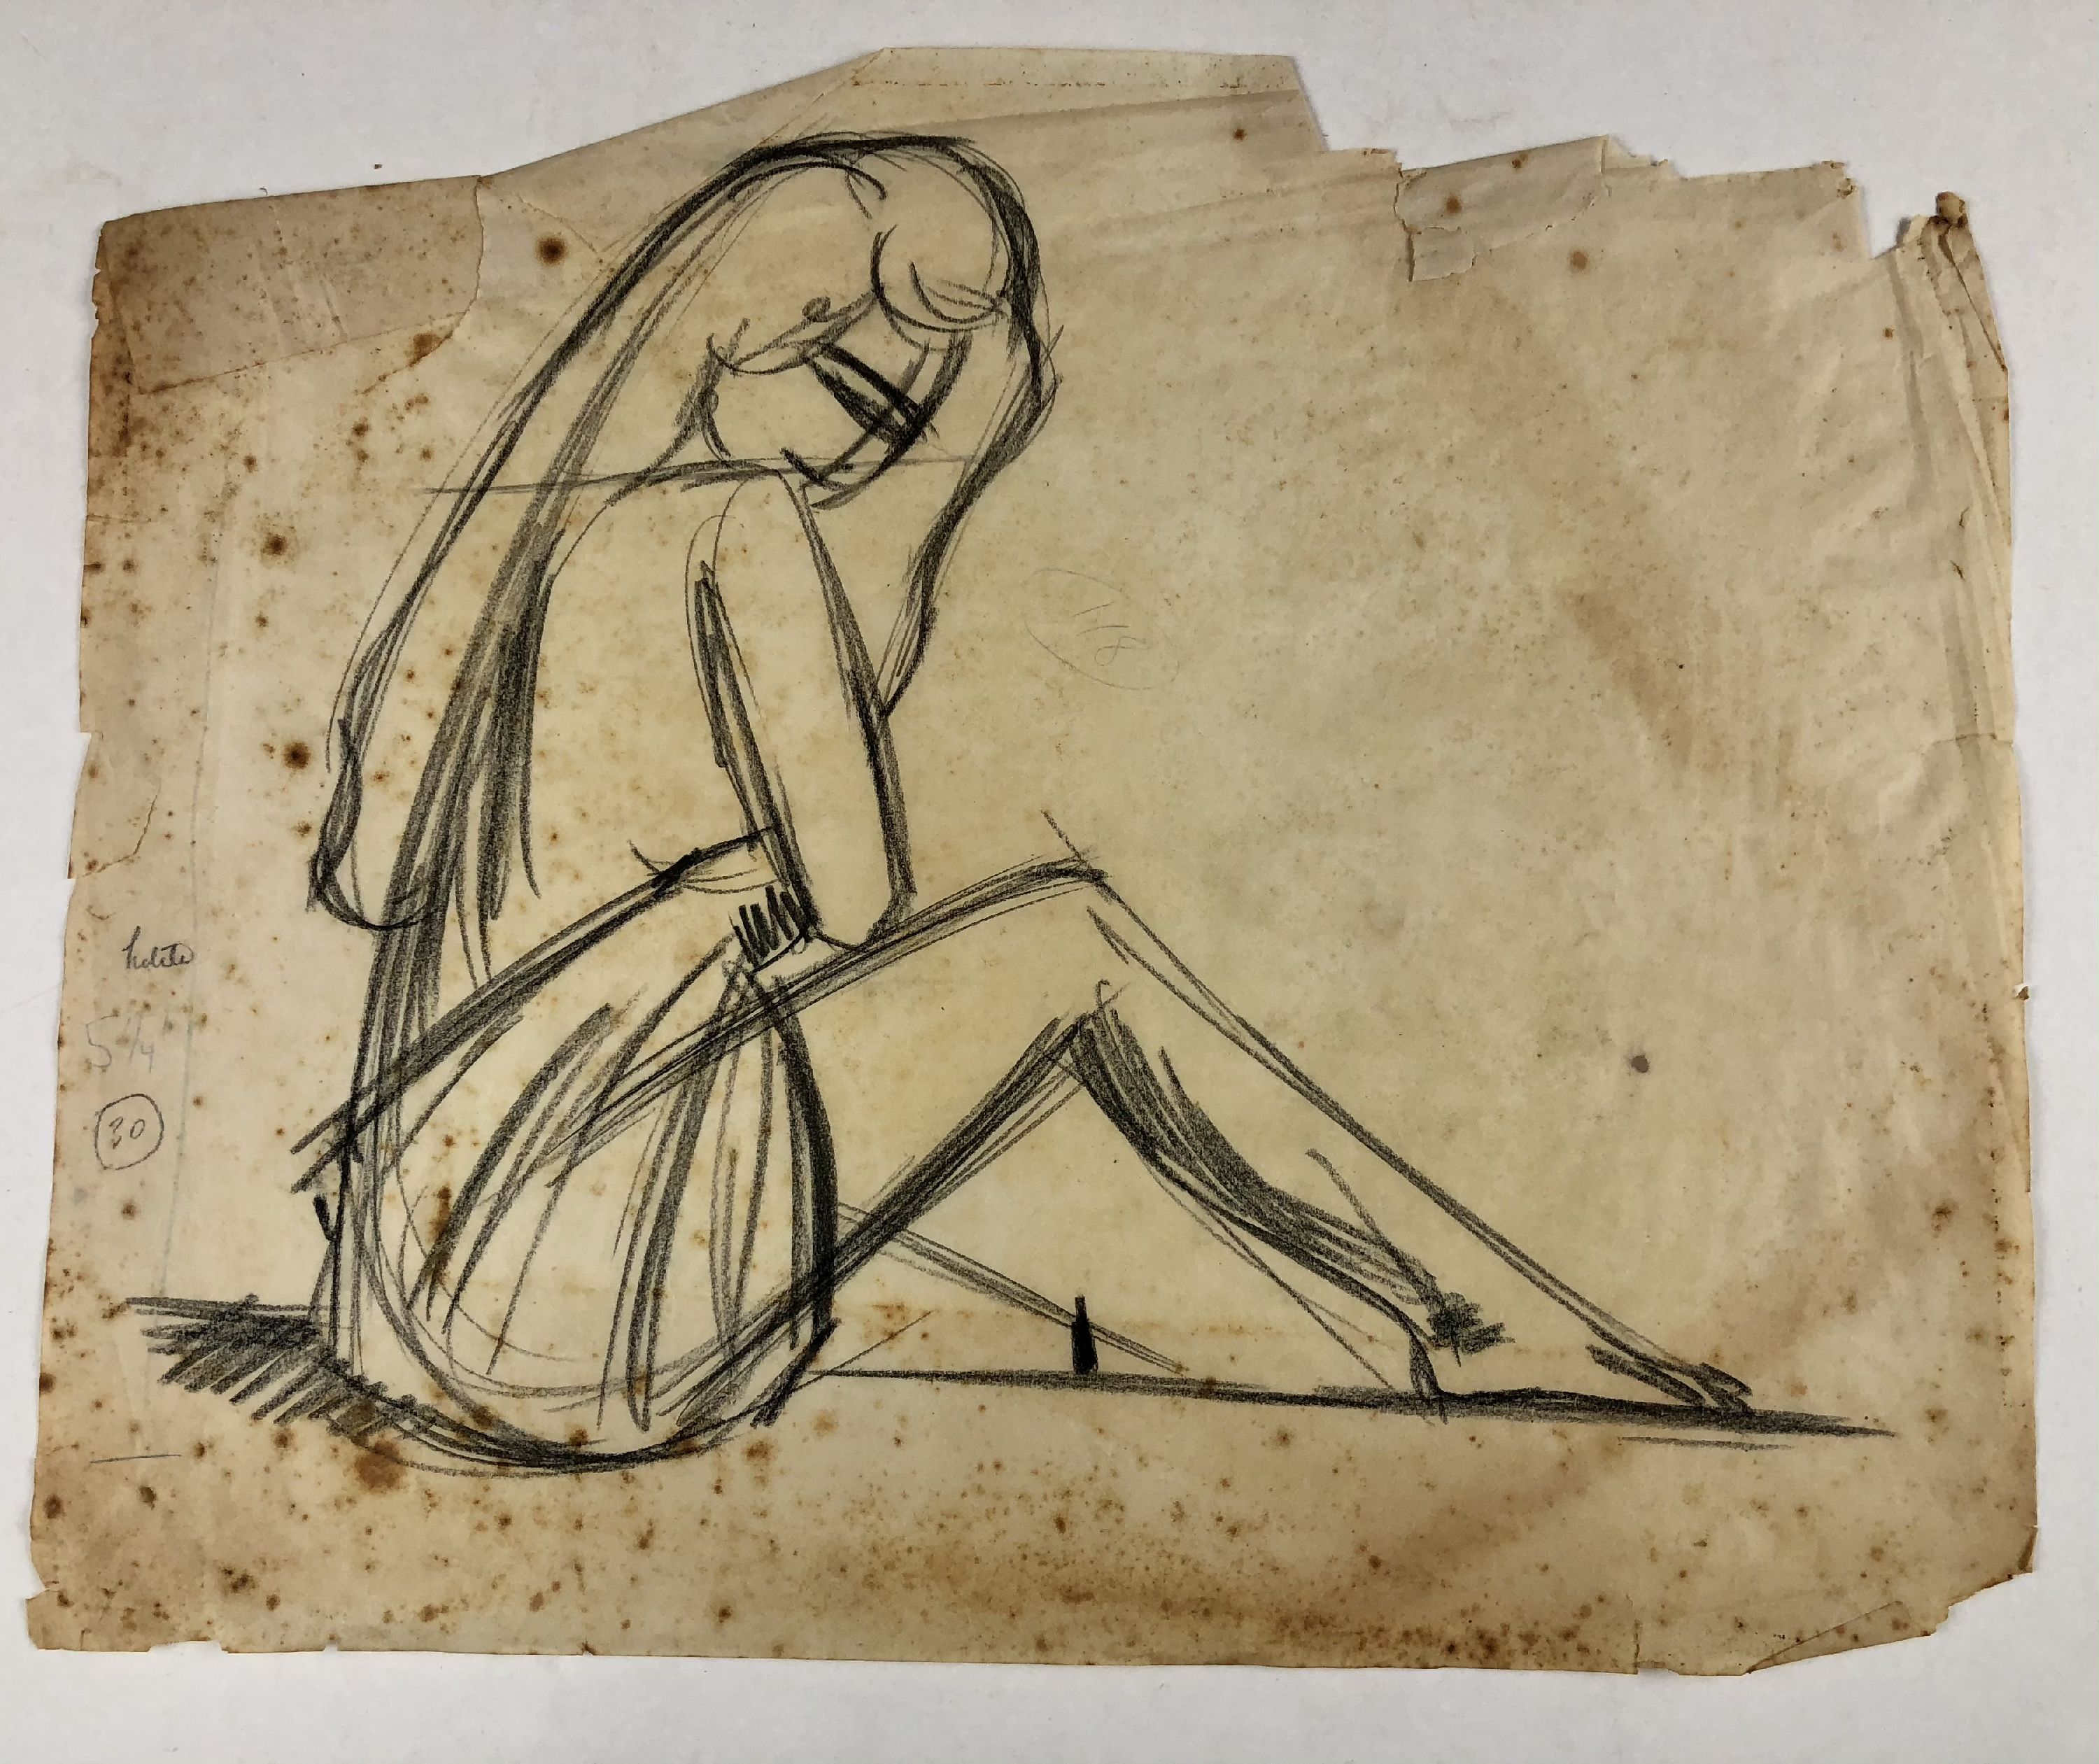 very preliminary charcoal sketch of seated woman with long hair covering herself with fabric